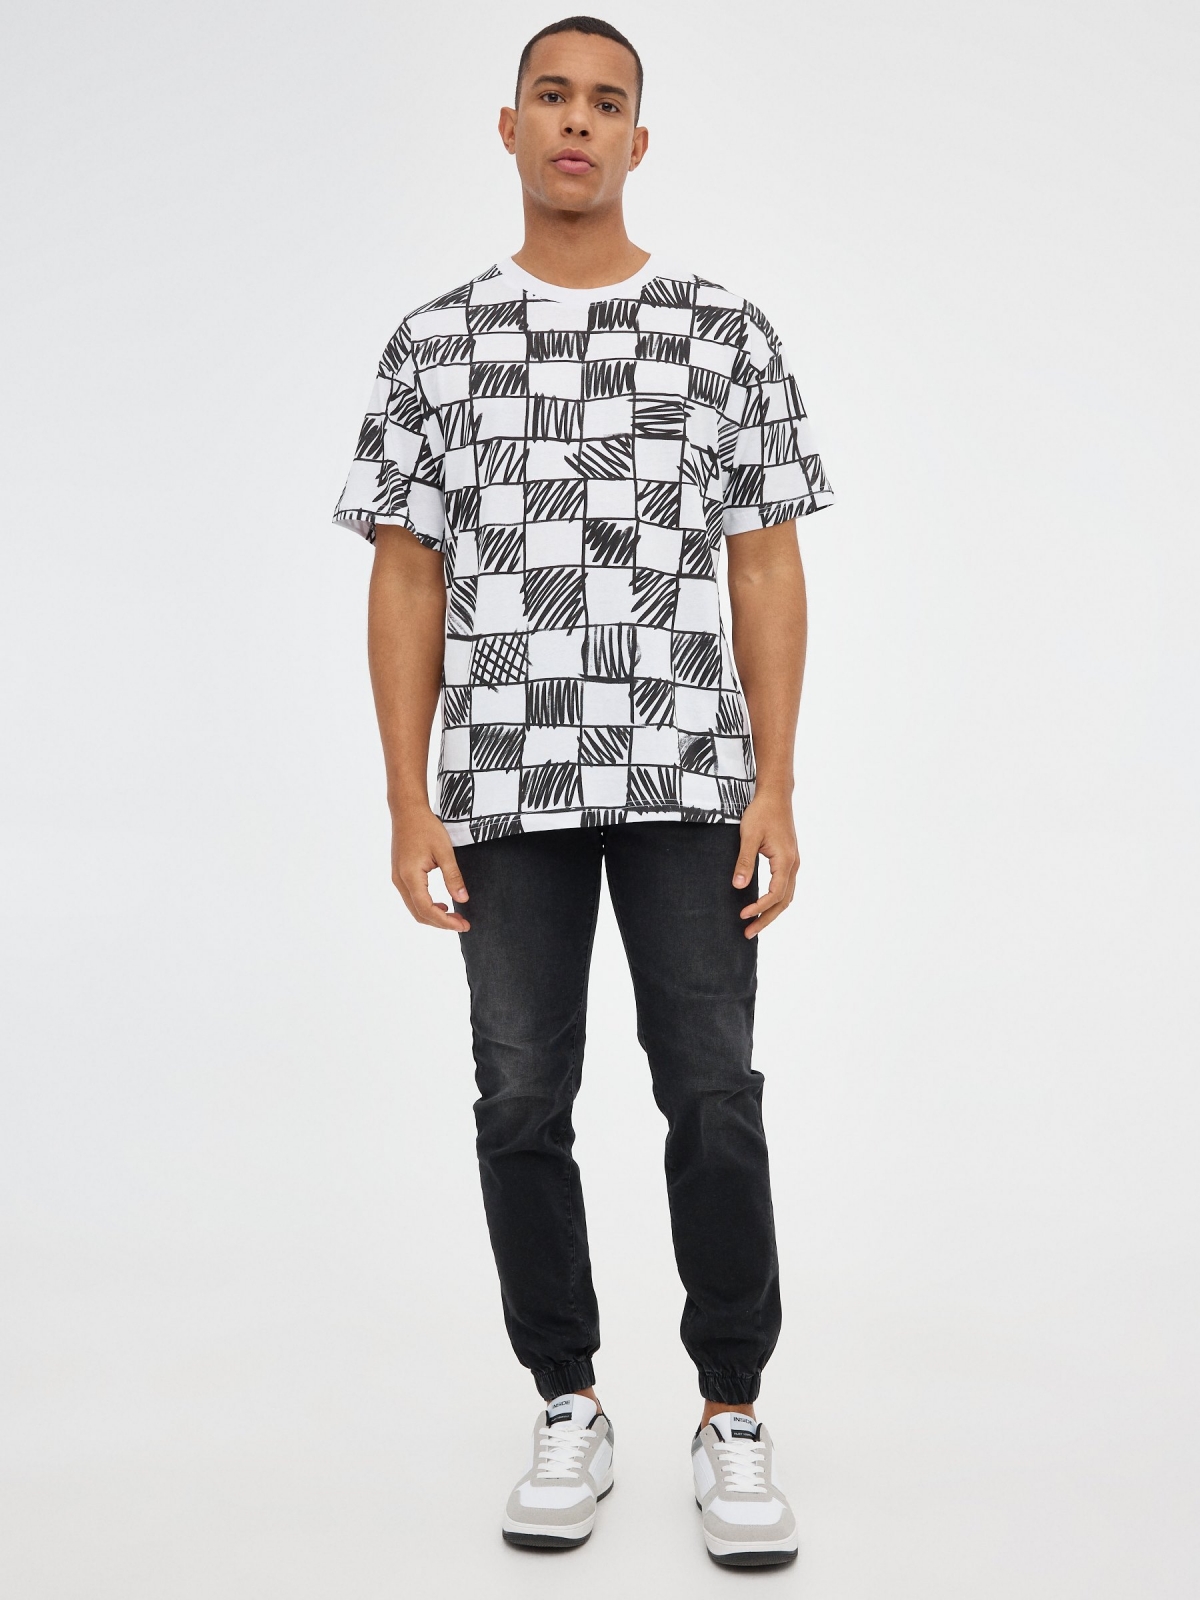 Black and white checkered t-shirt black front view